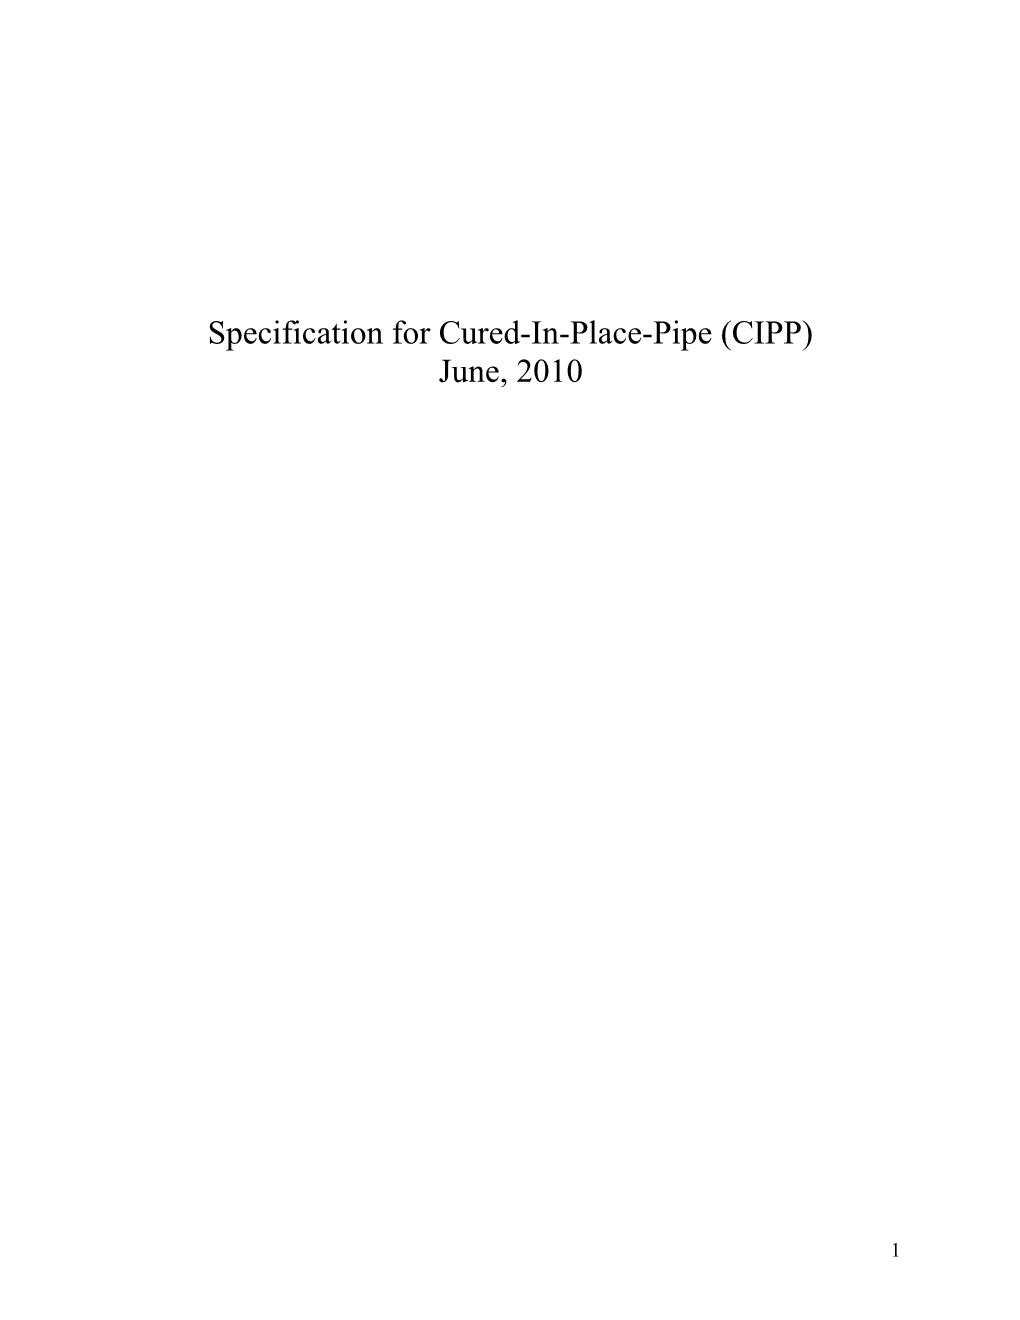 Specification for Cured-In-Place-Pipe (Cipp)